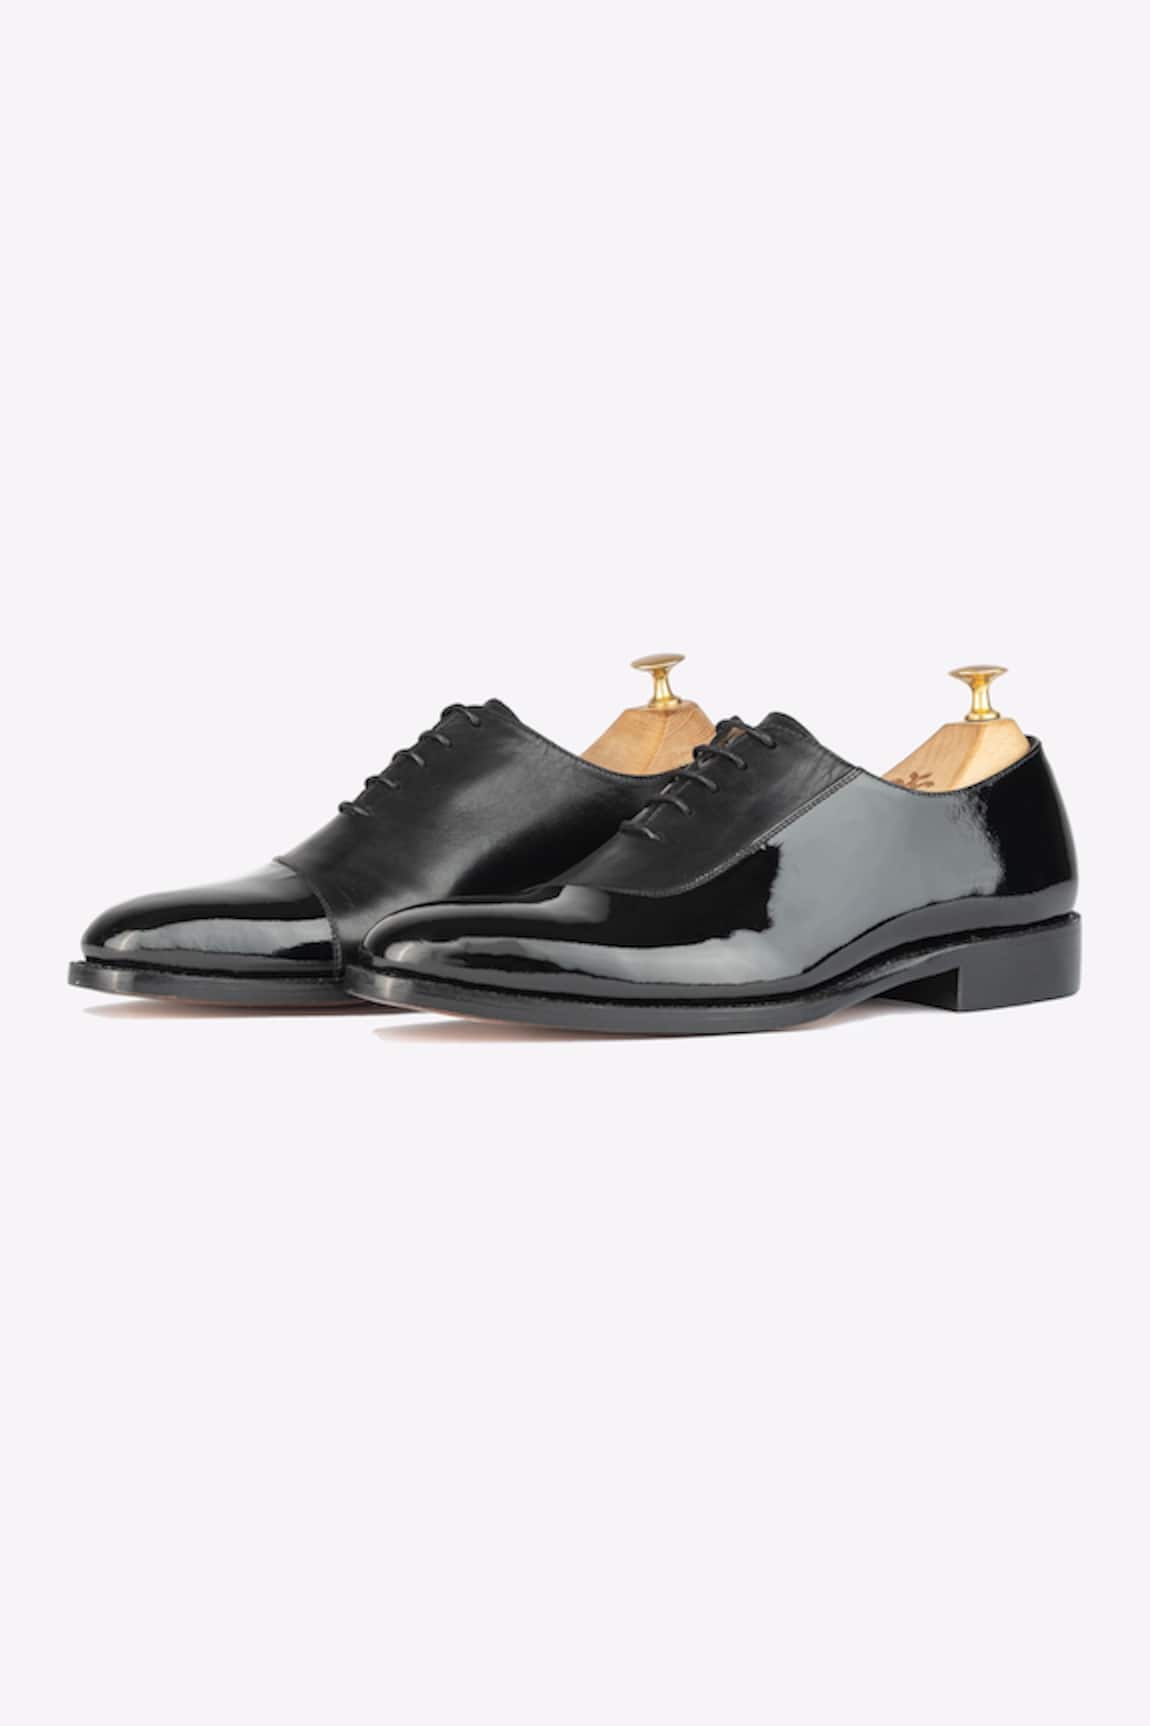 Whitemuds Repton Patent Oxford Shoes